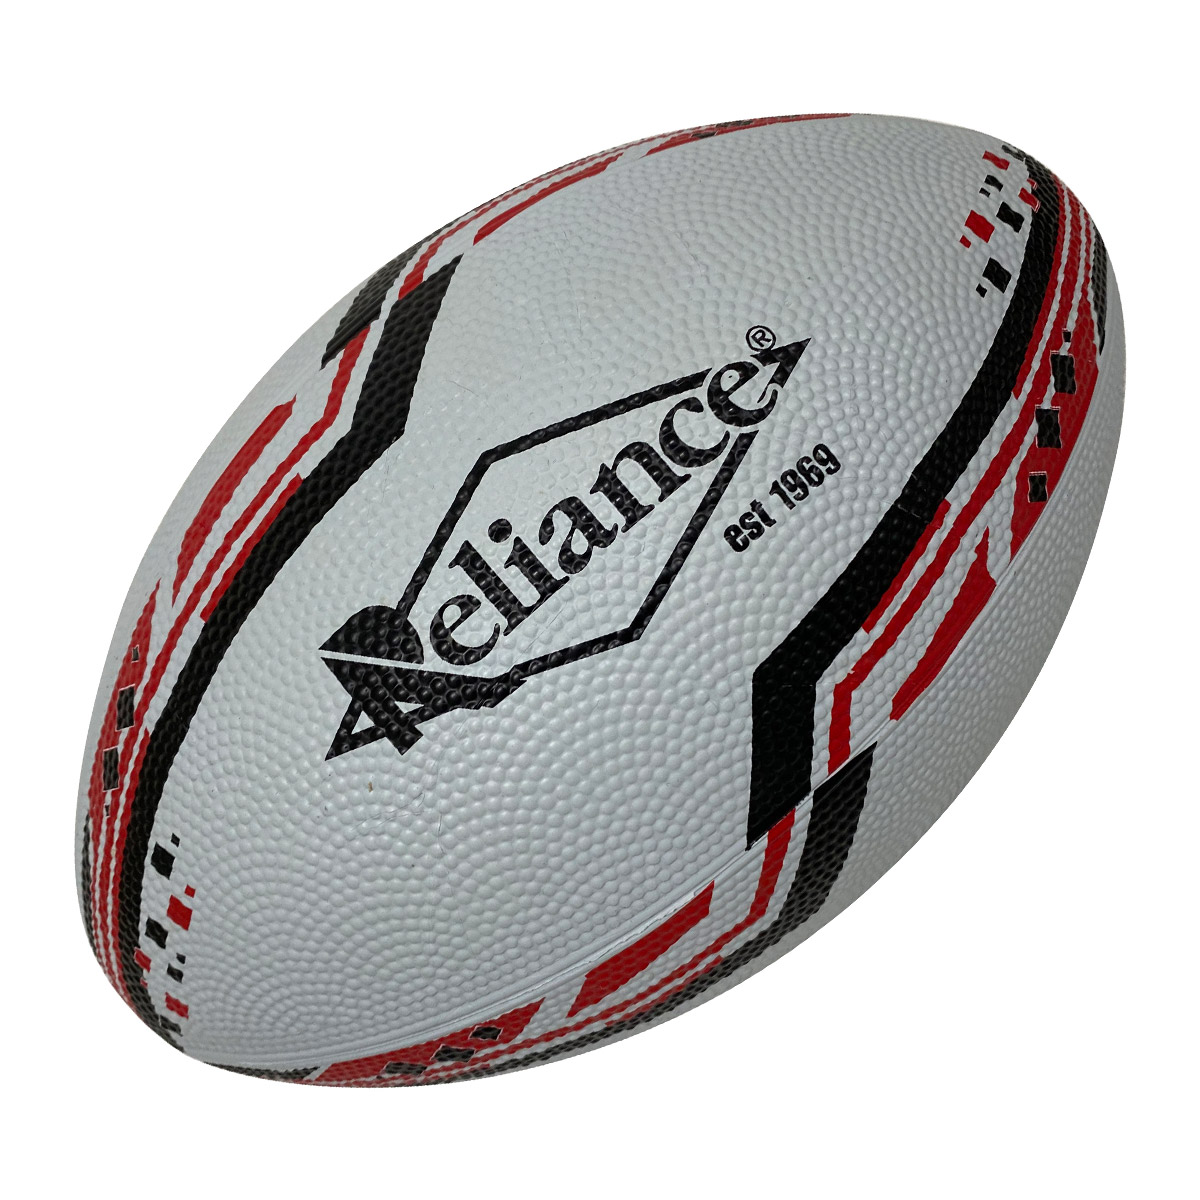 sporting_balls--reliance--rugby1